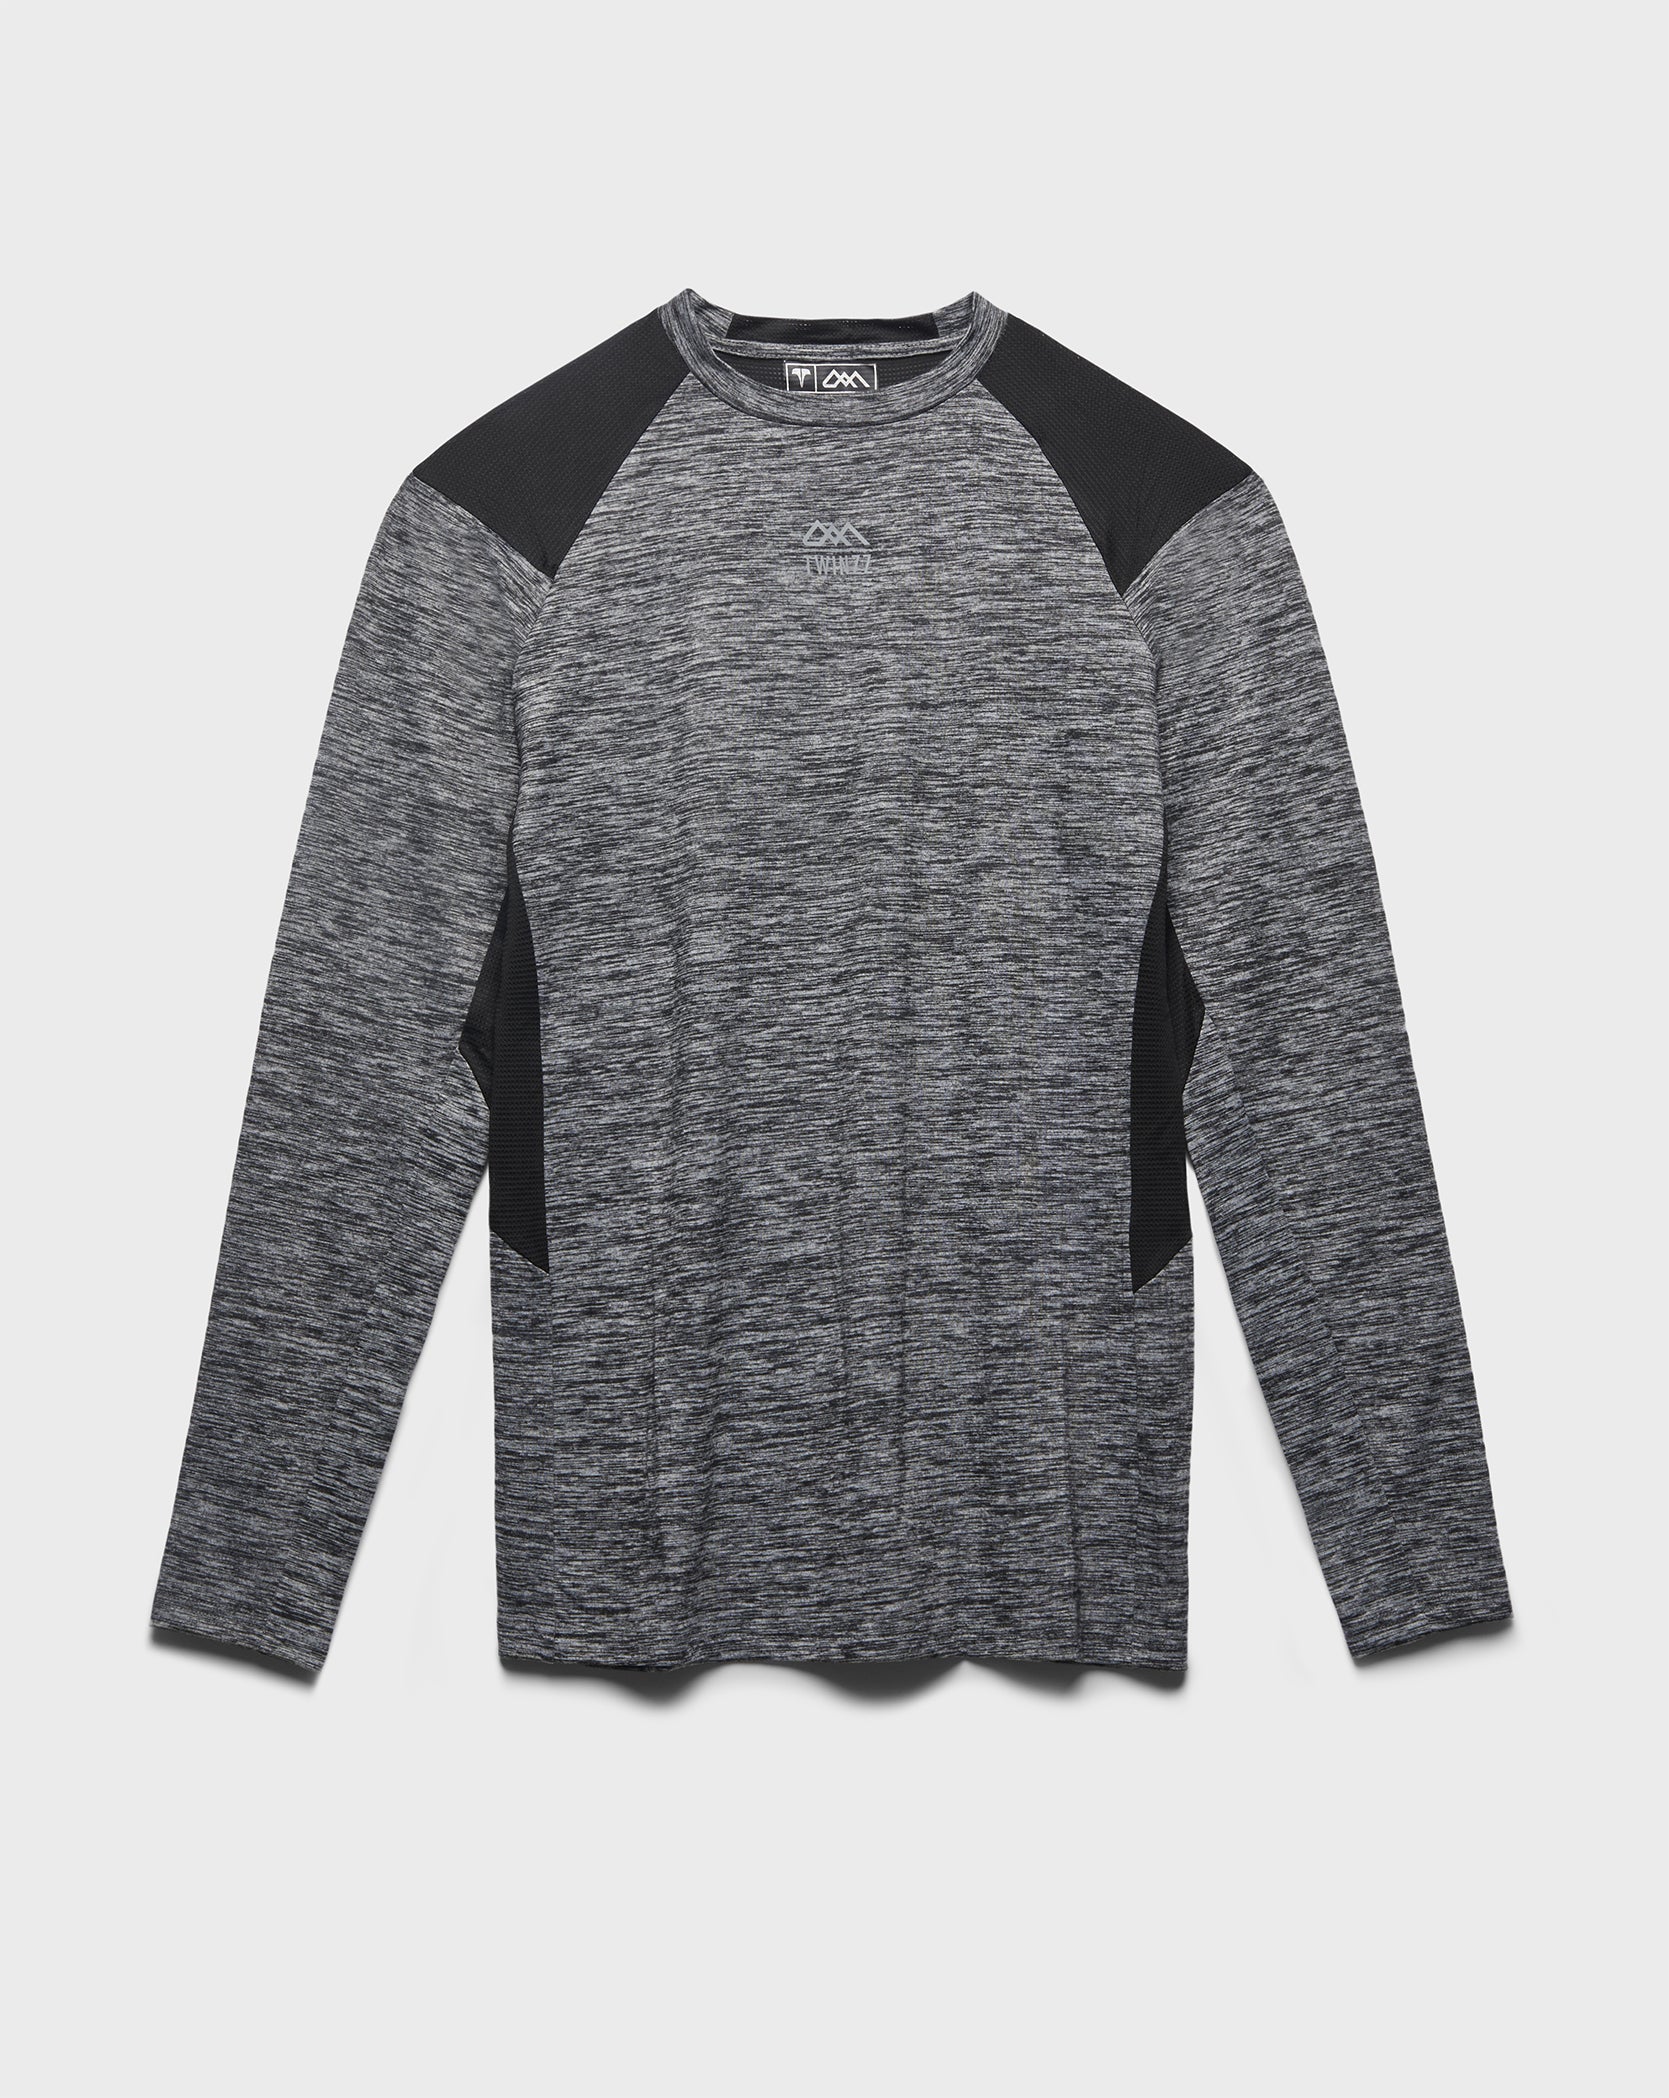 Grey and black Twinzz long sleeve active tee